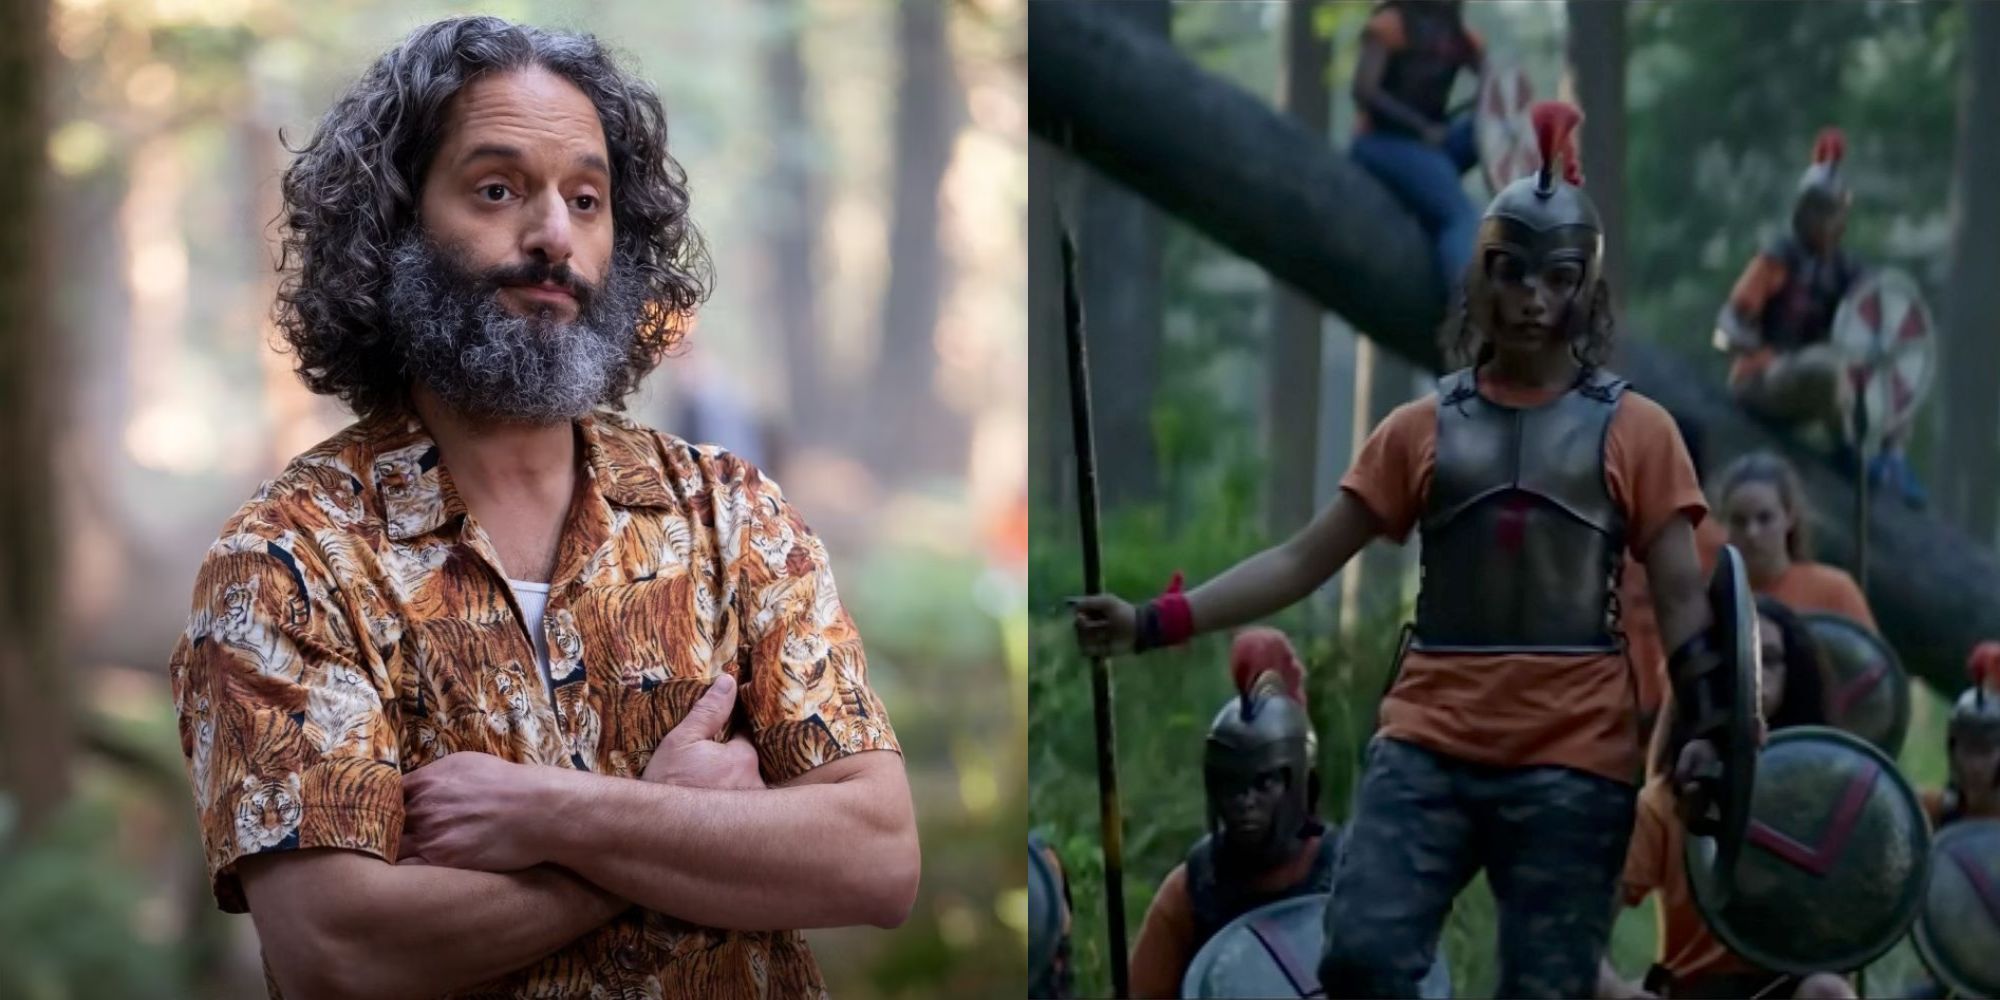 Jason Mantzoukas as Dionysus and campers at Camp Half-Blood in Percy Jackson